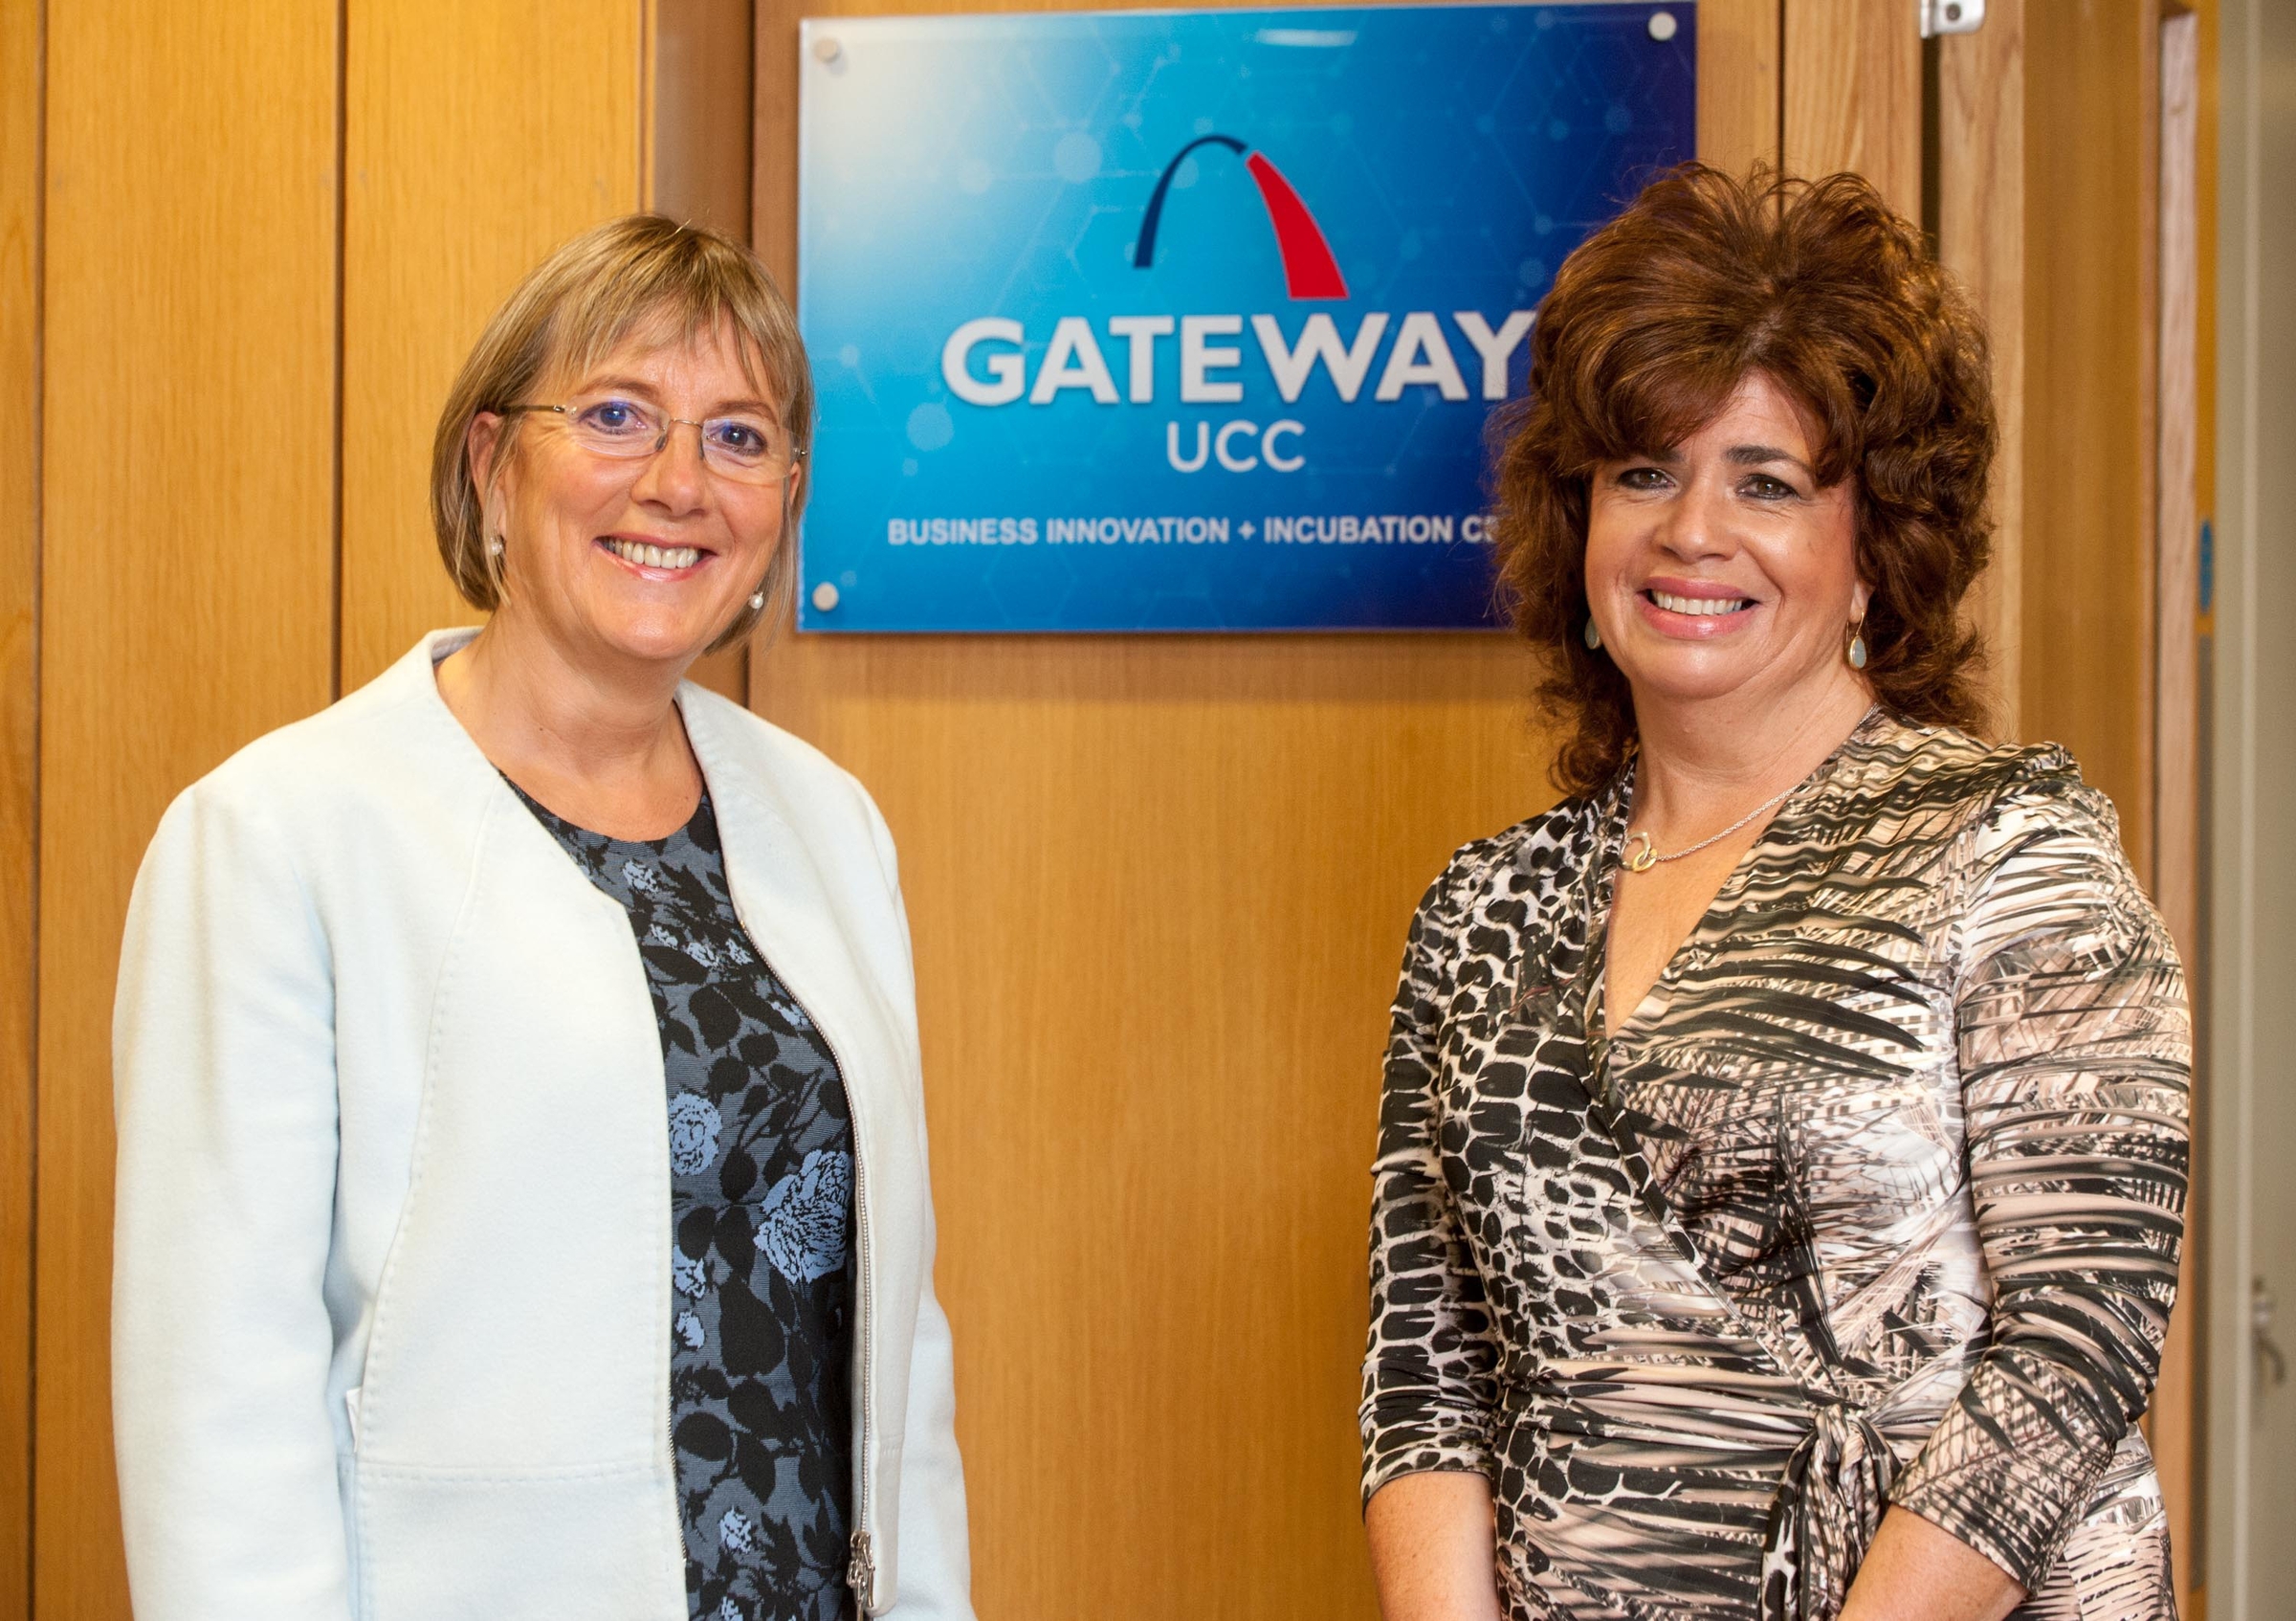 Enterprise Ireland Hosted its Board Meeting in GATEWAY UCC on 9th September